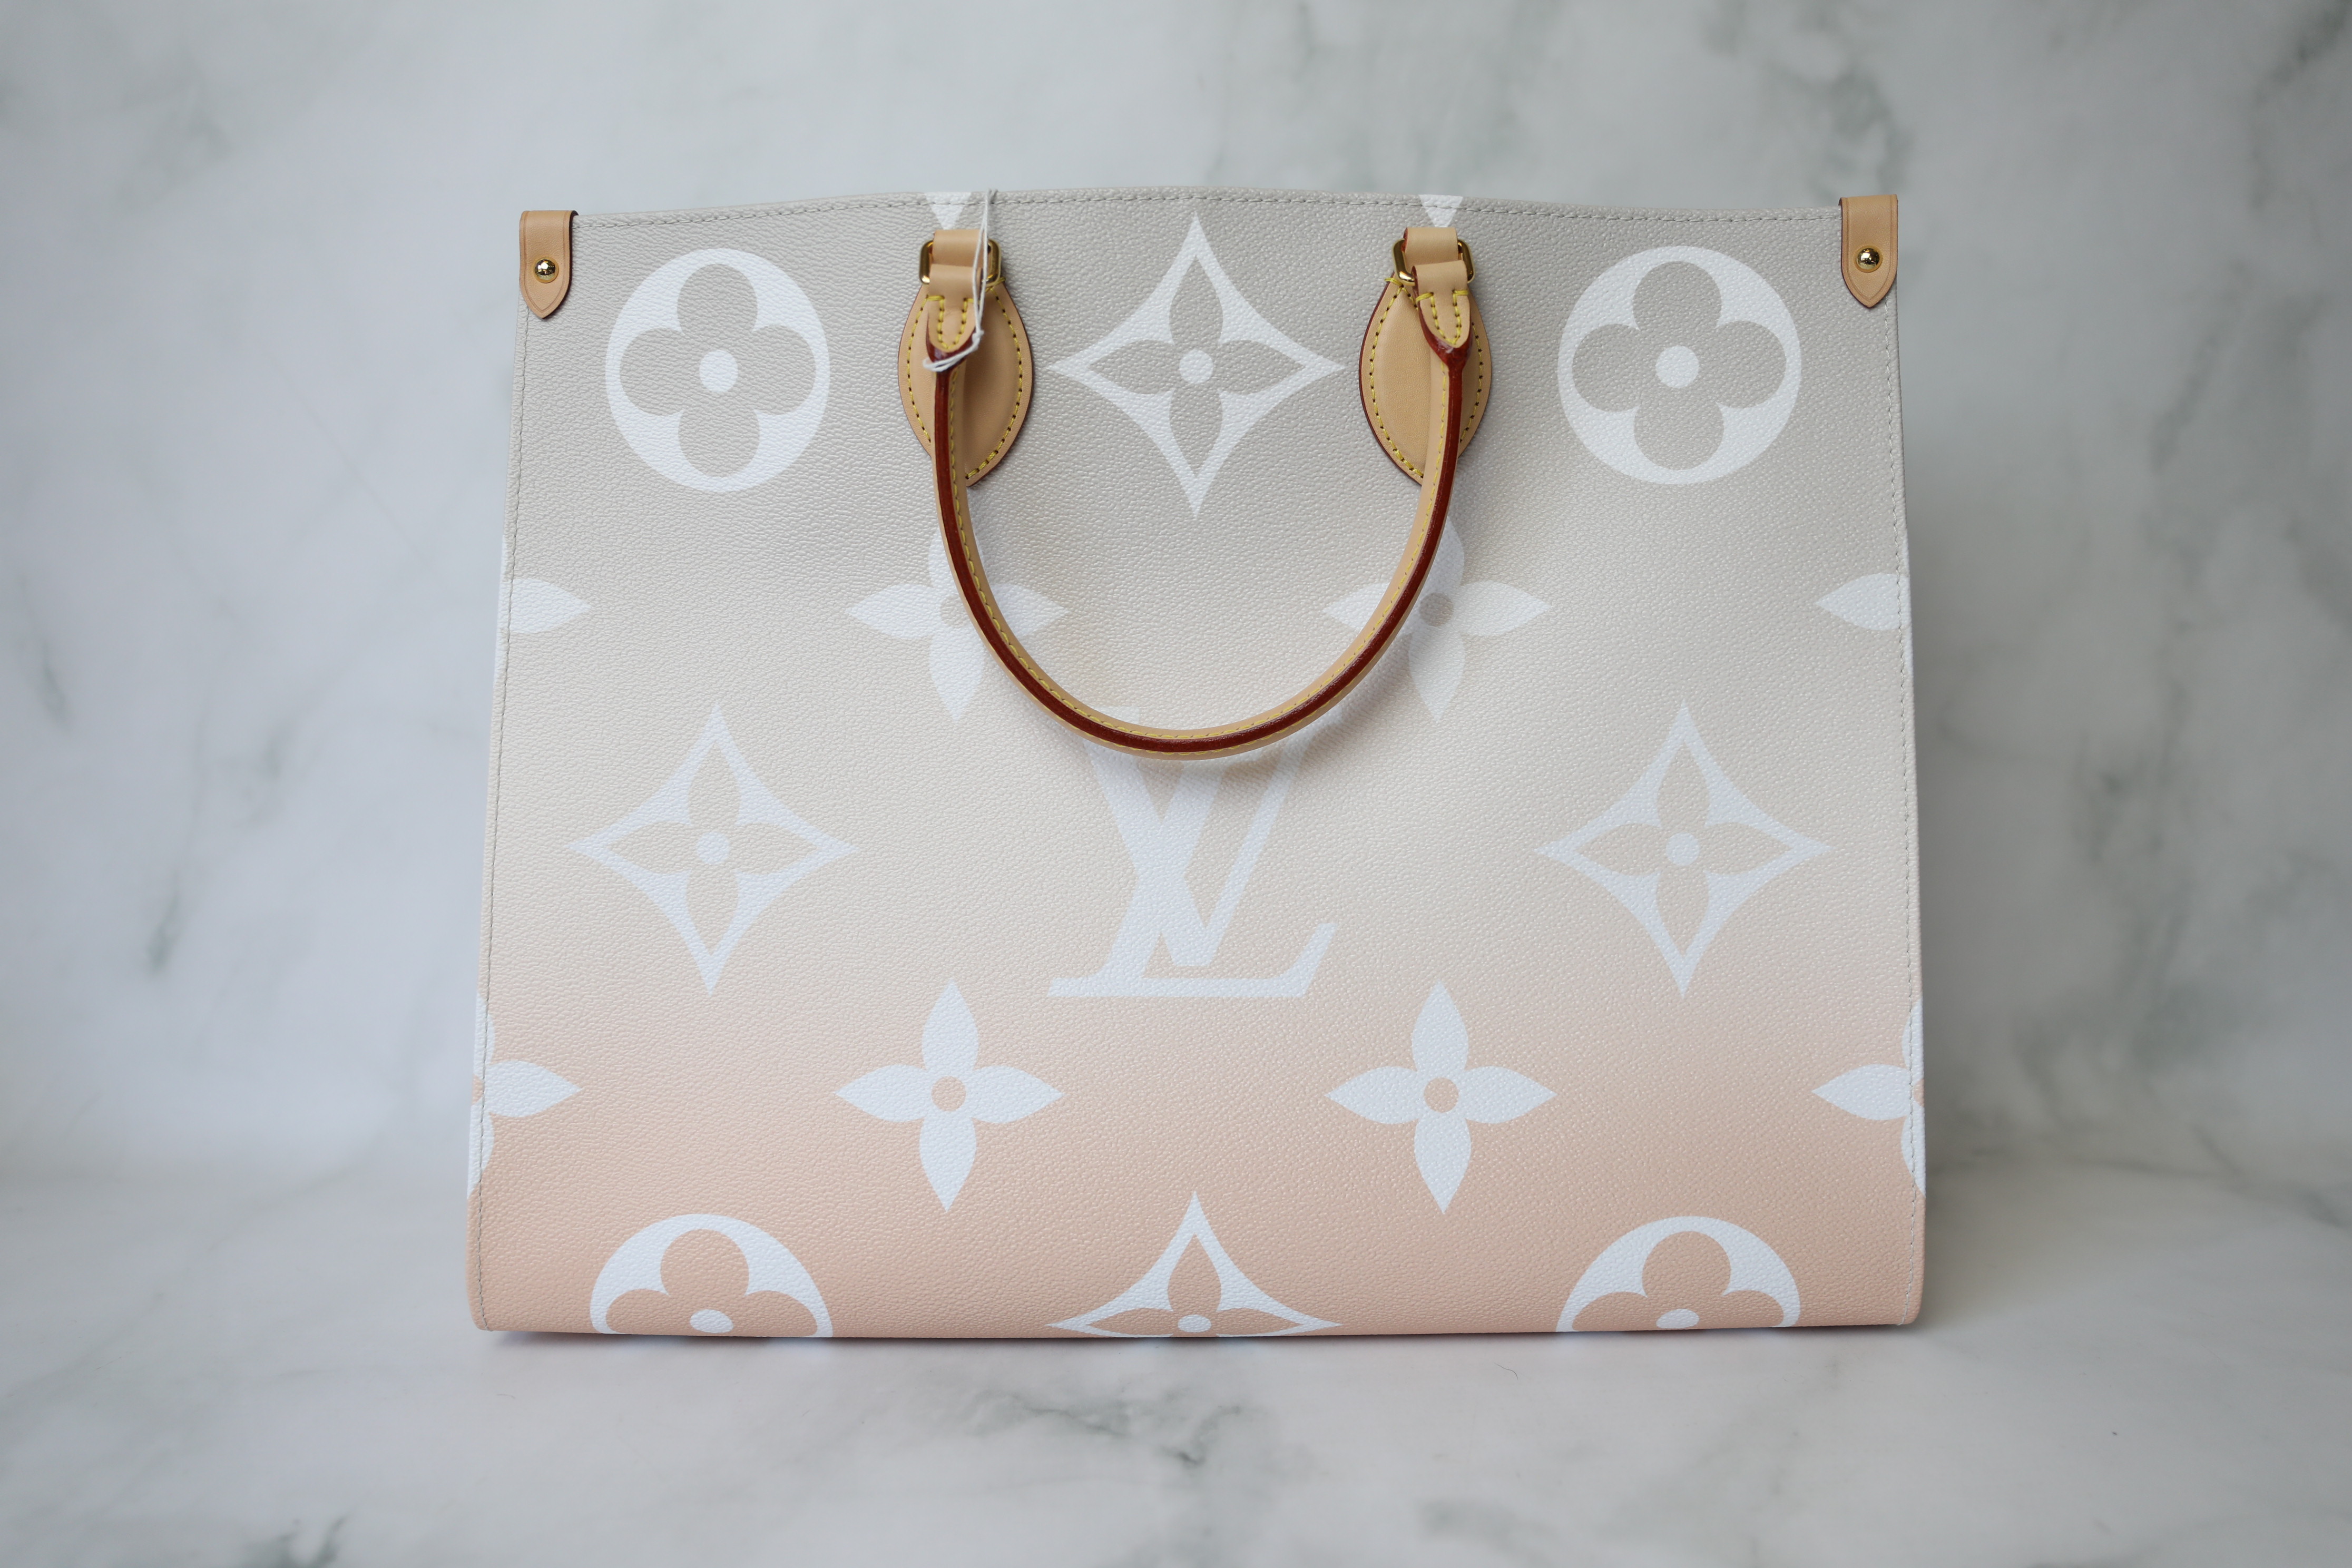 Louis Vuitton By The Pool On the Go GM, Mist Beige Ombre, New in Box WA001